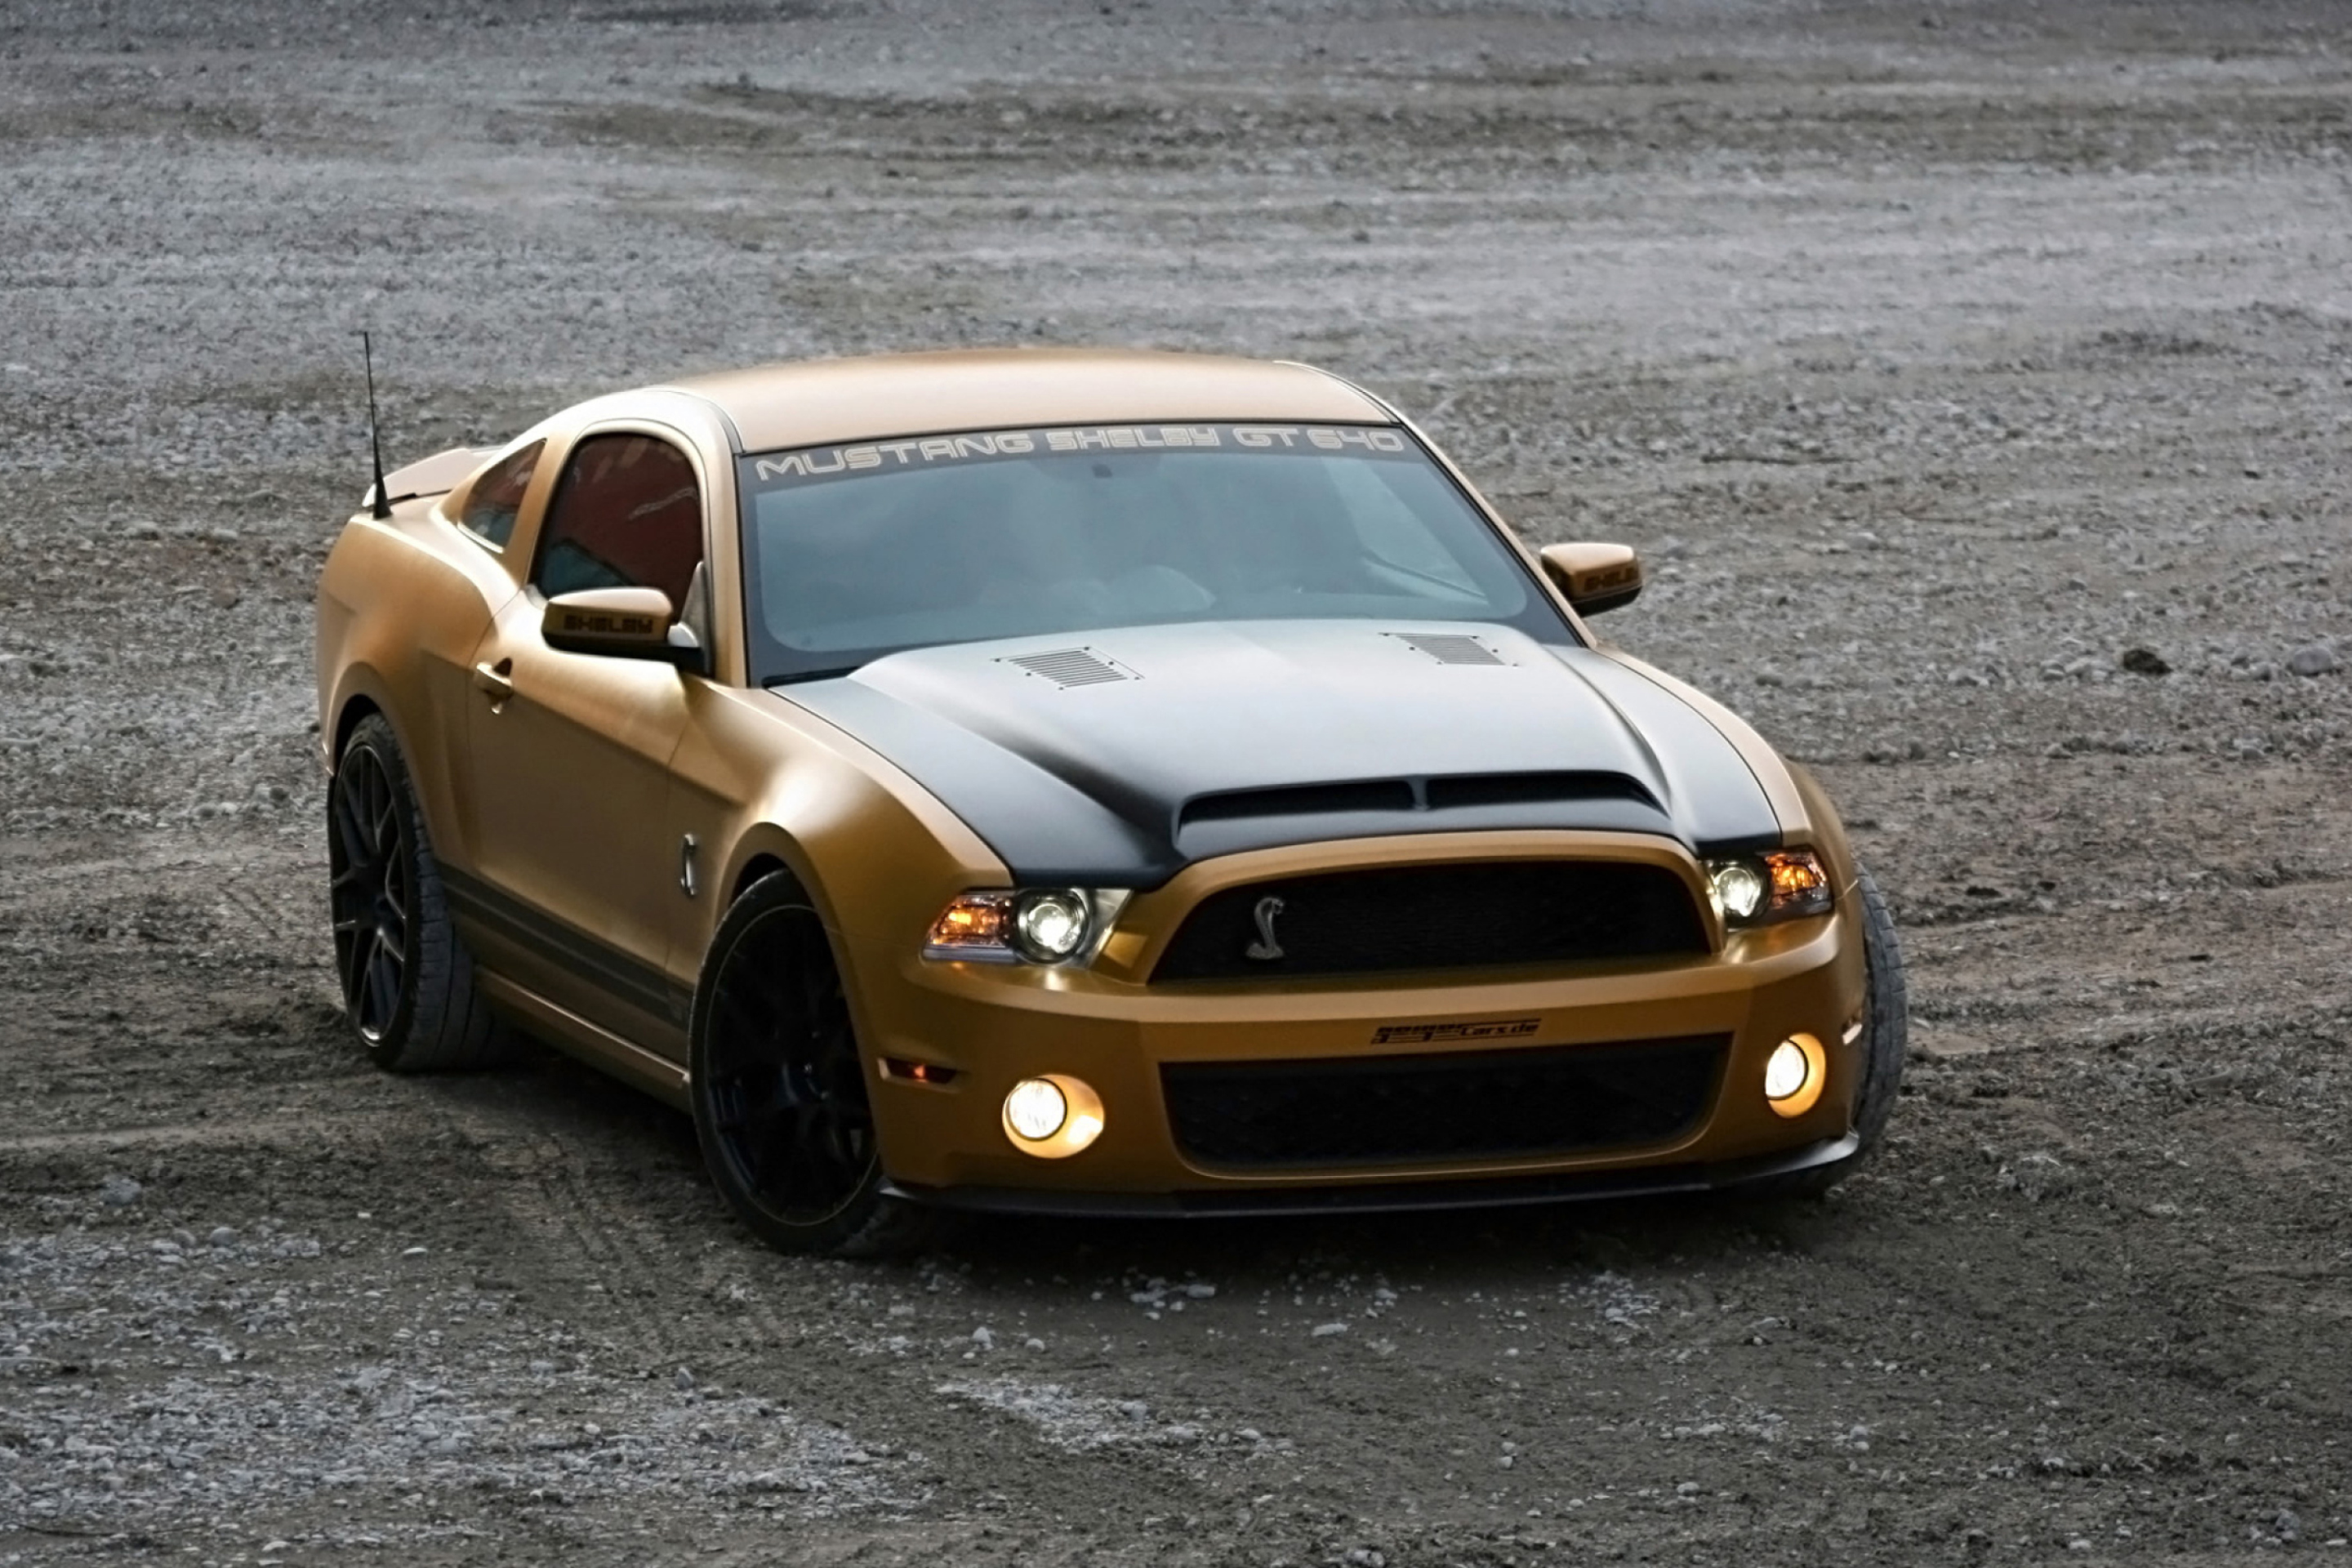 Das Ford Mustang Shelby GT640 Wallpaper 2880x1920